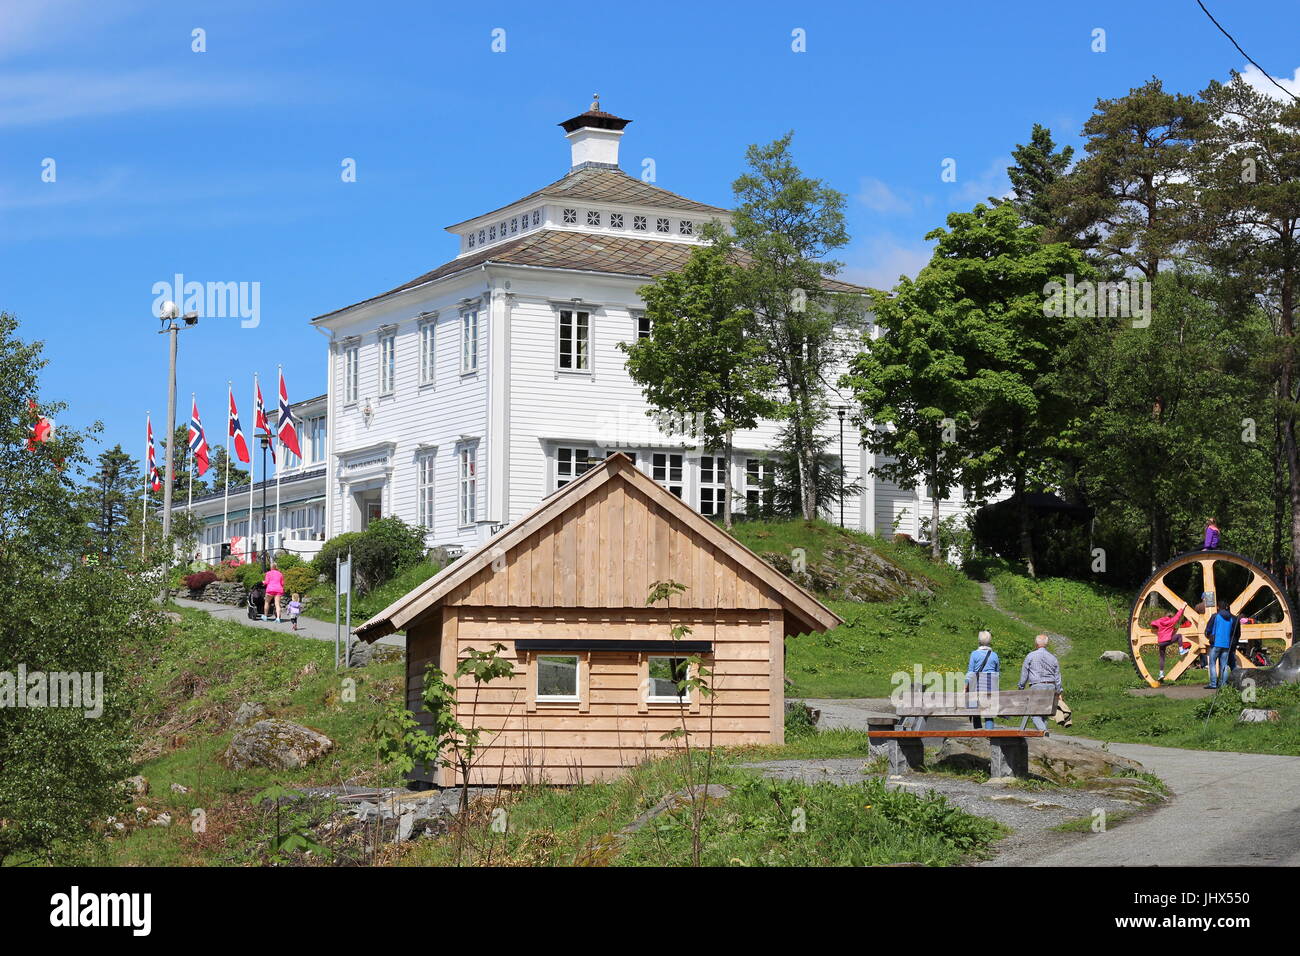 Walkers on woodland path to hill summit with wooden cabin and children playing Stock Photo